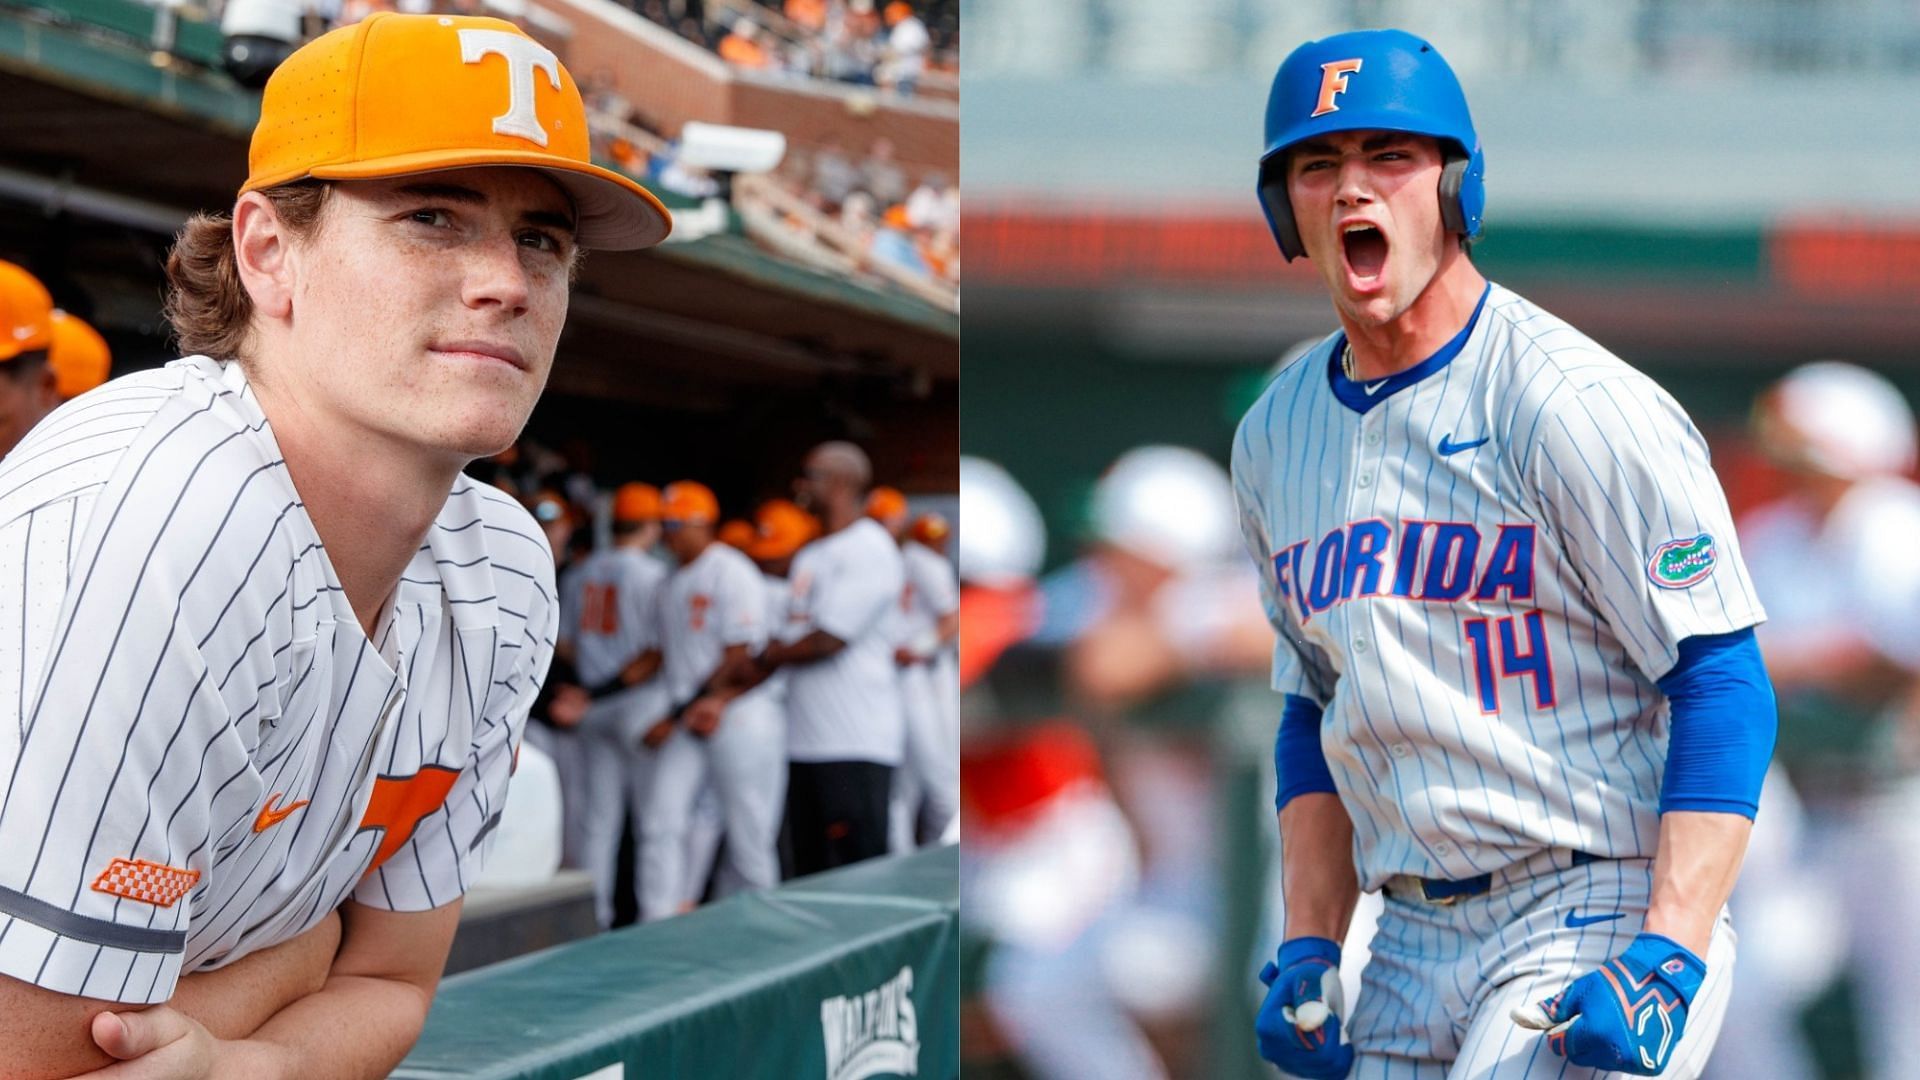 Images courtesy of Tennessee and Florida Athletics